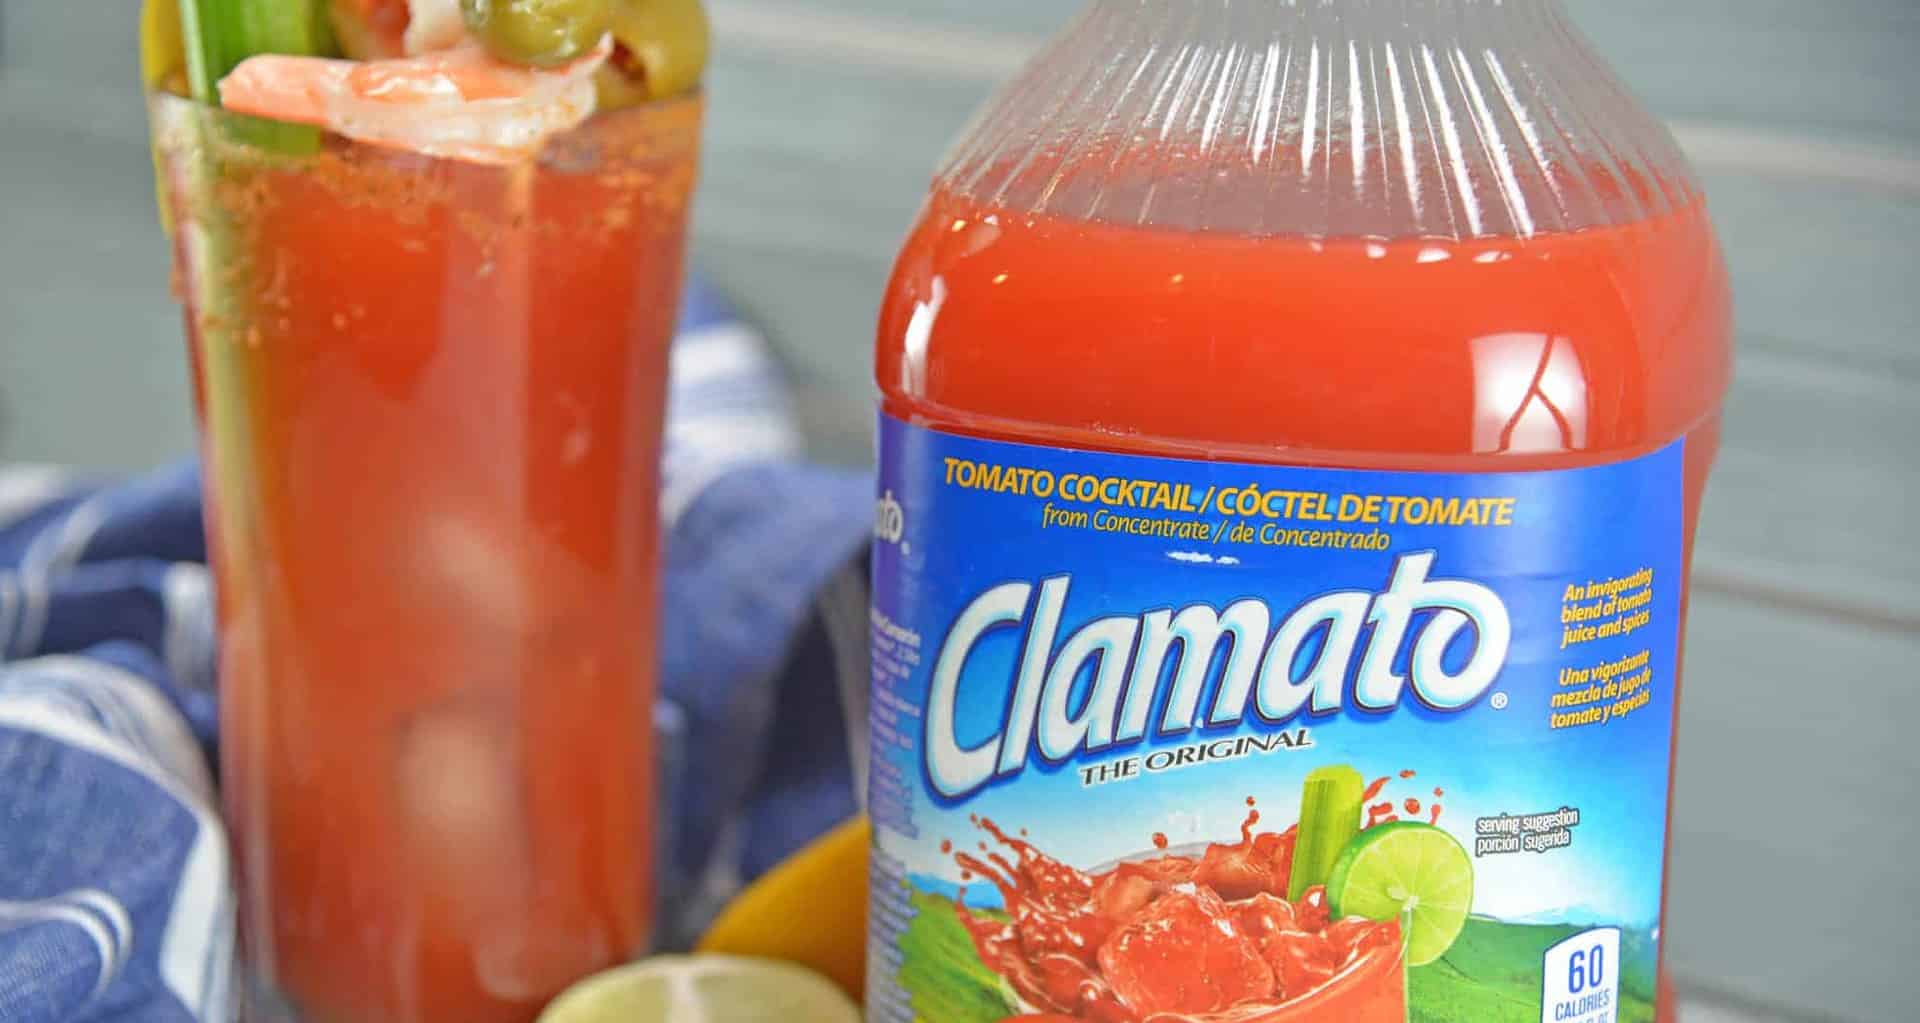 how long is clamato good for after opening